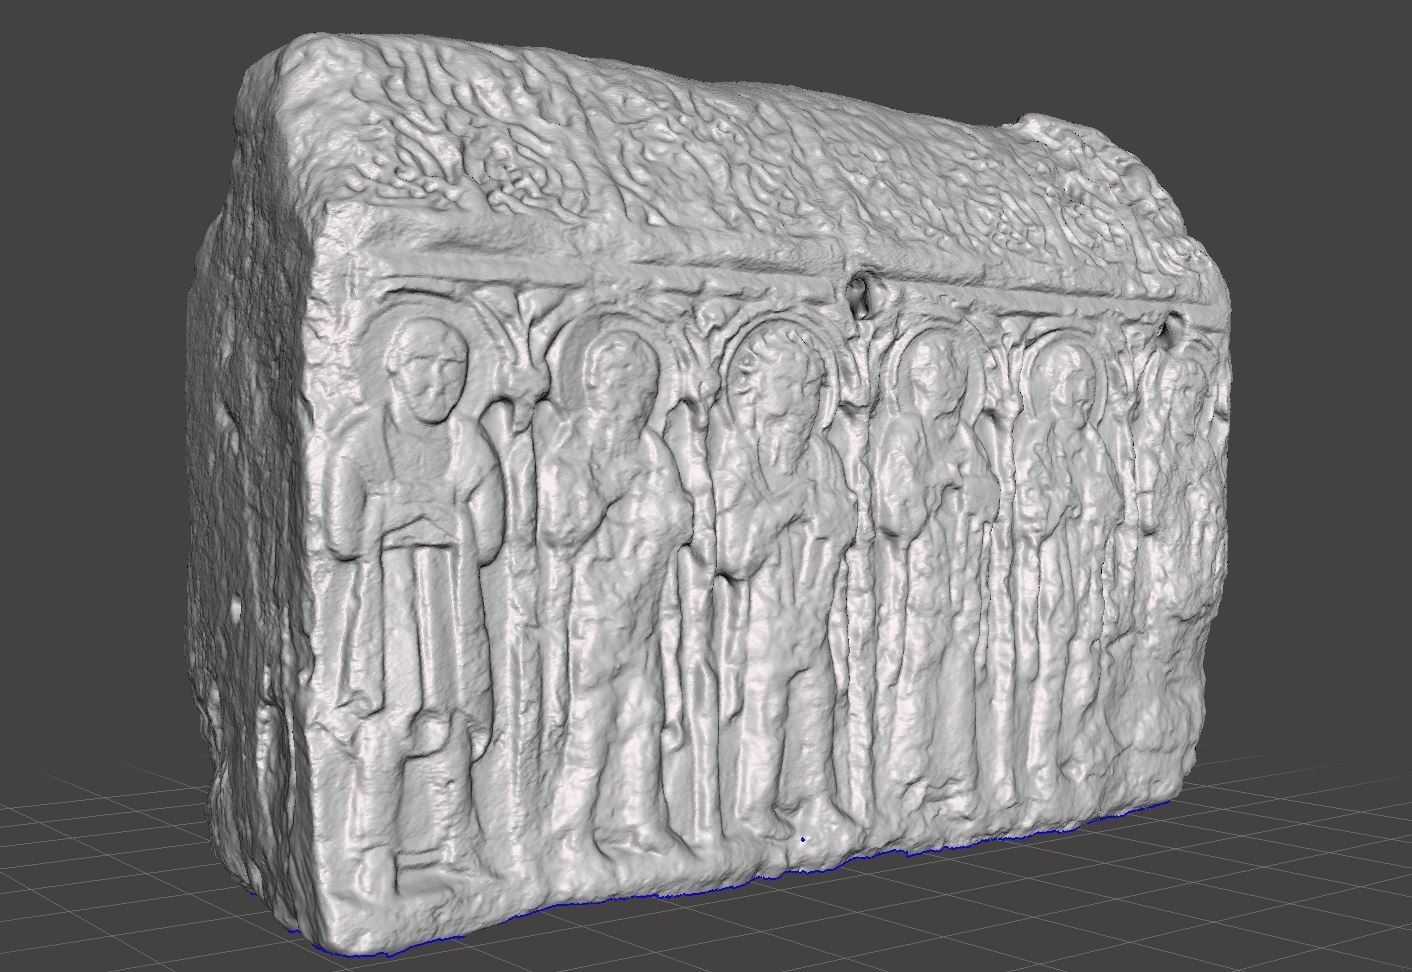 A 3D scan of the Hedda stone